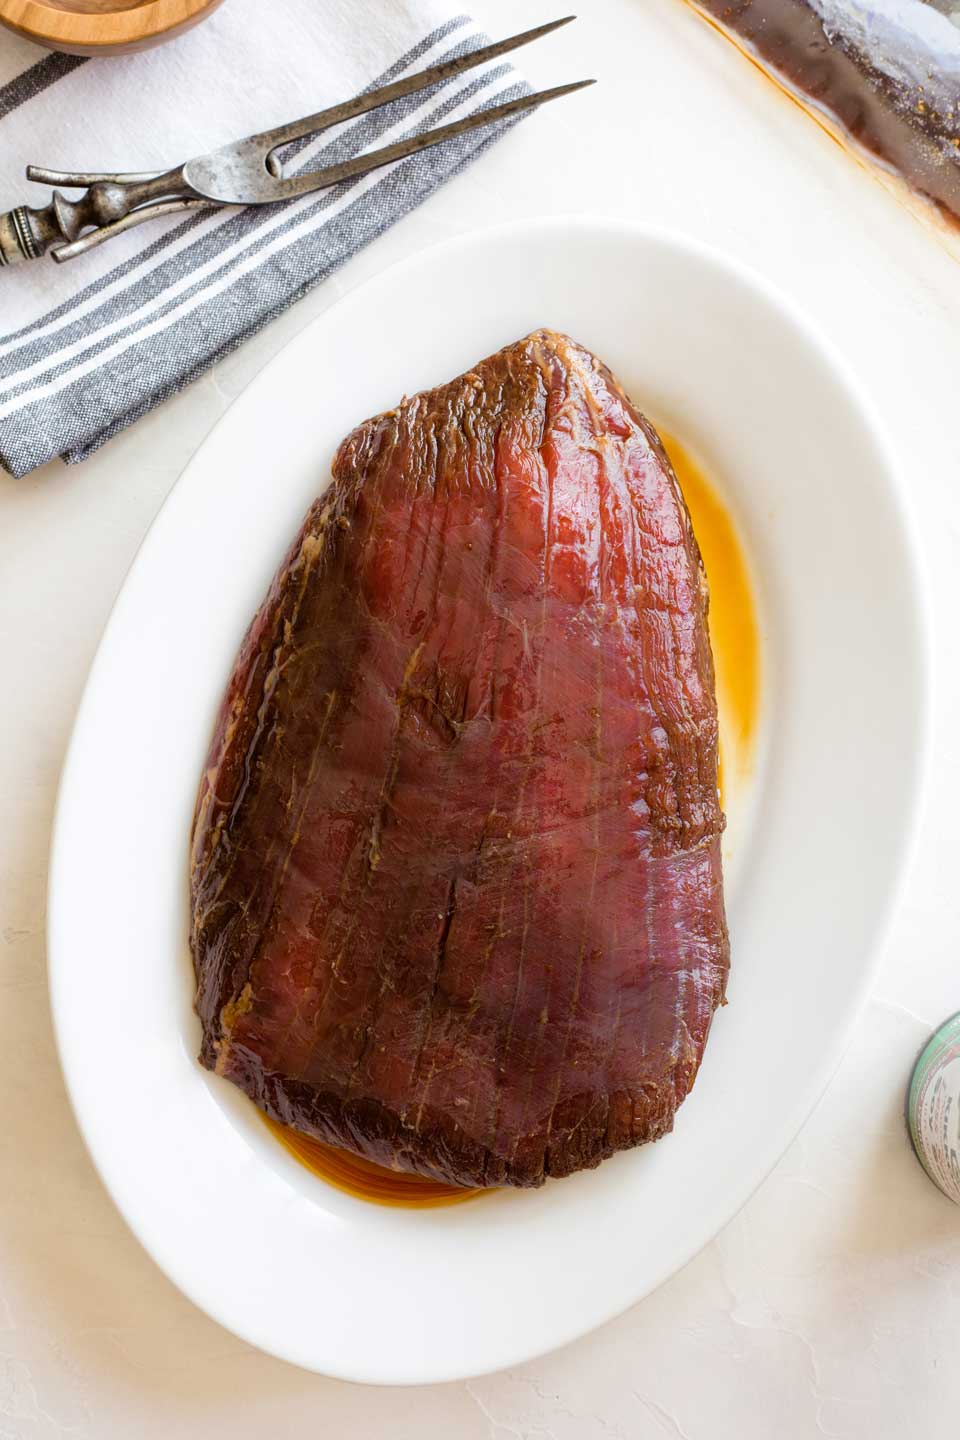 Marinated flank steak on white oval plate before being grilled.